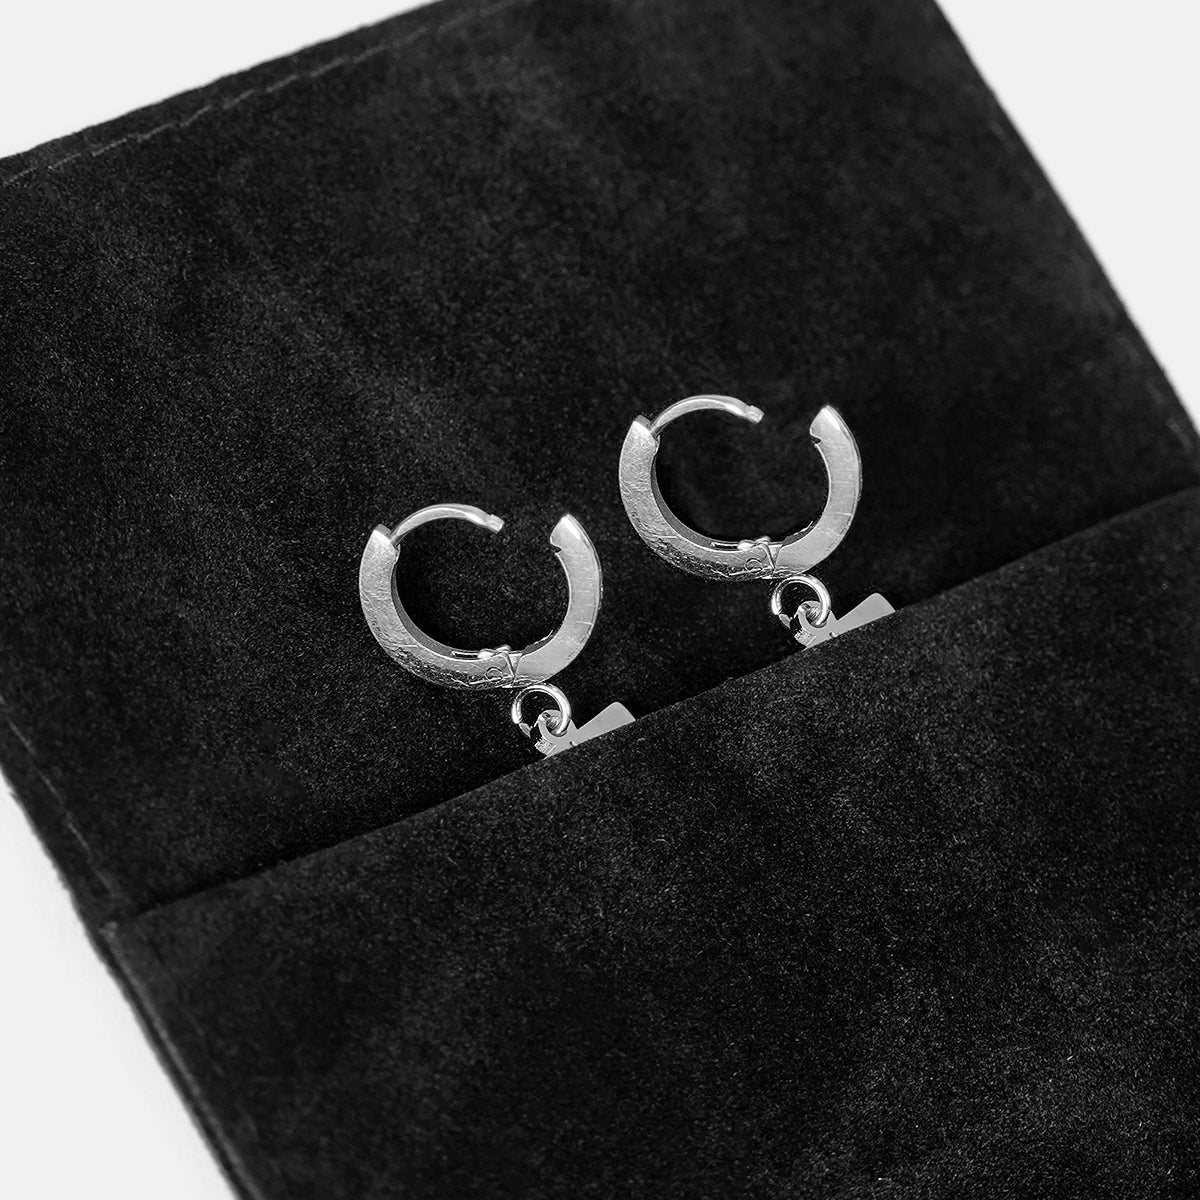 61 Number Earring - Stainless Steel